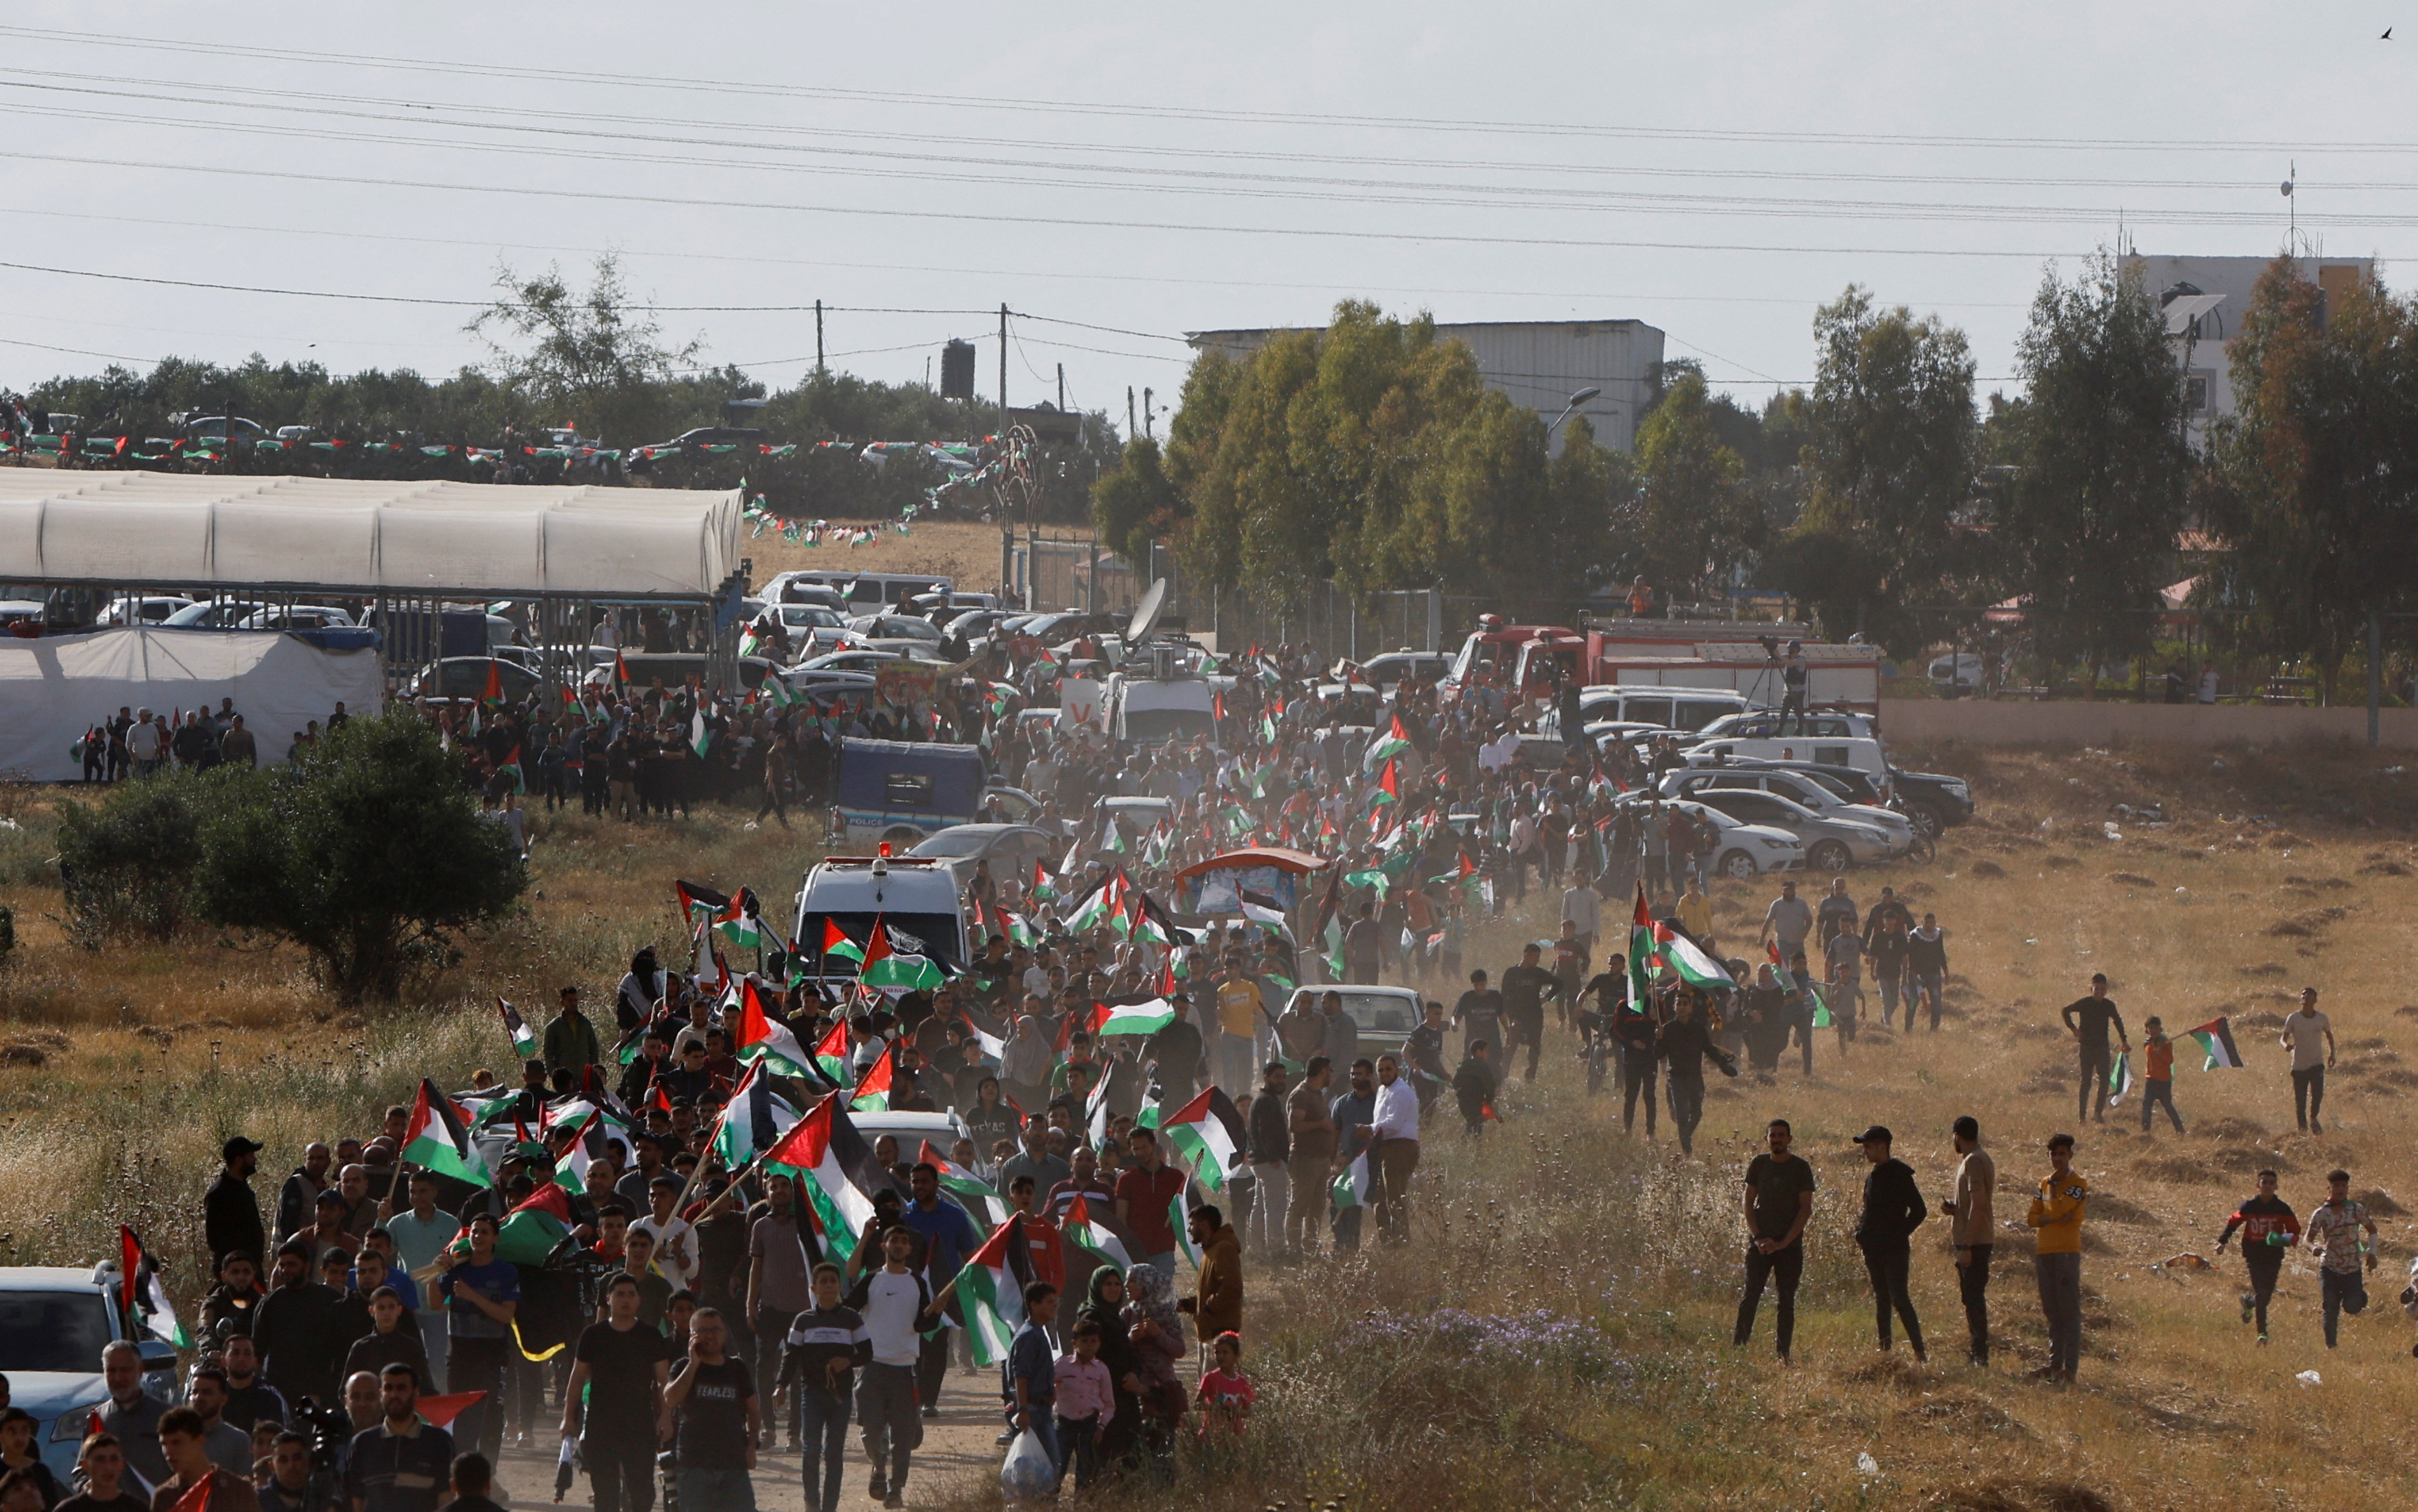 Palestinians take part in a protest against the holding of the annual flag march in Jerusalem which marks Jerusalem Day